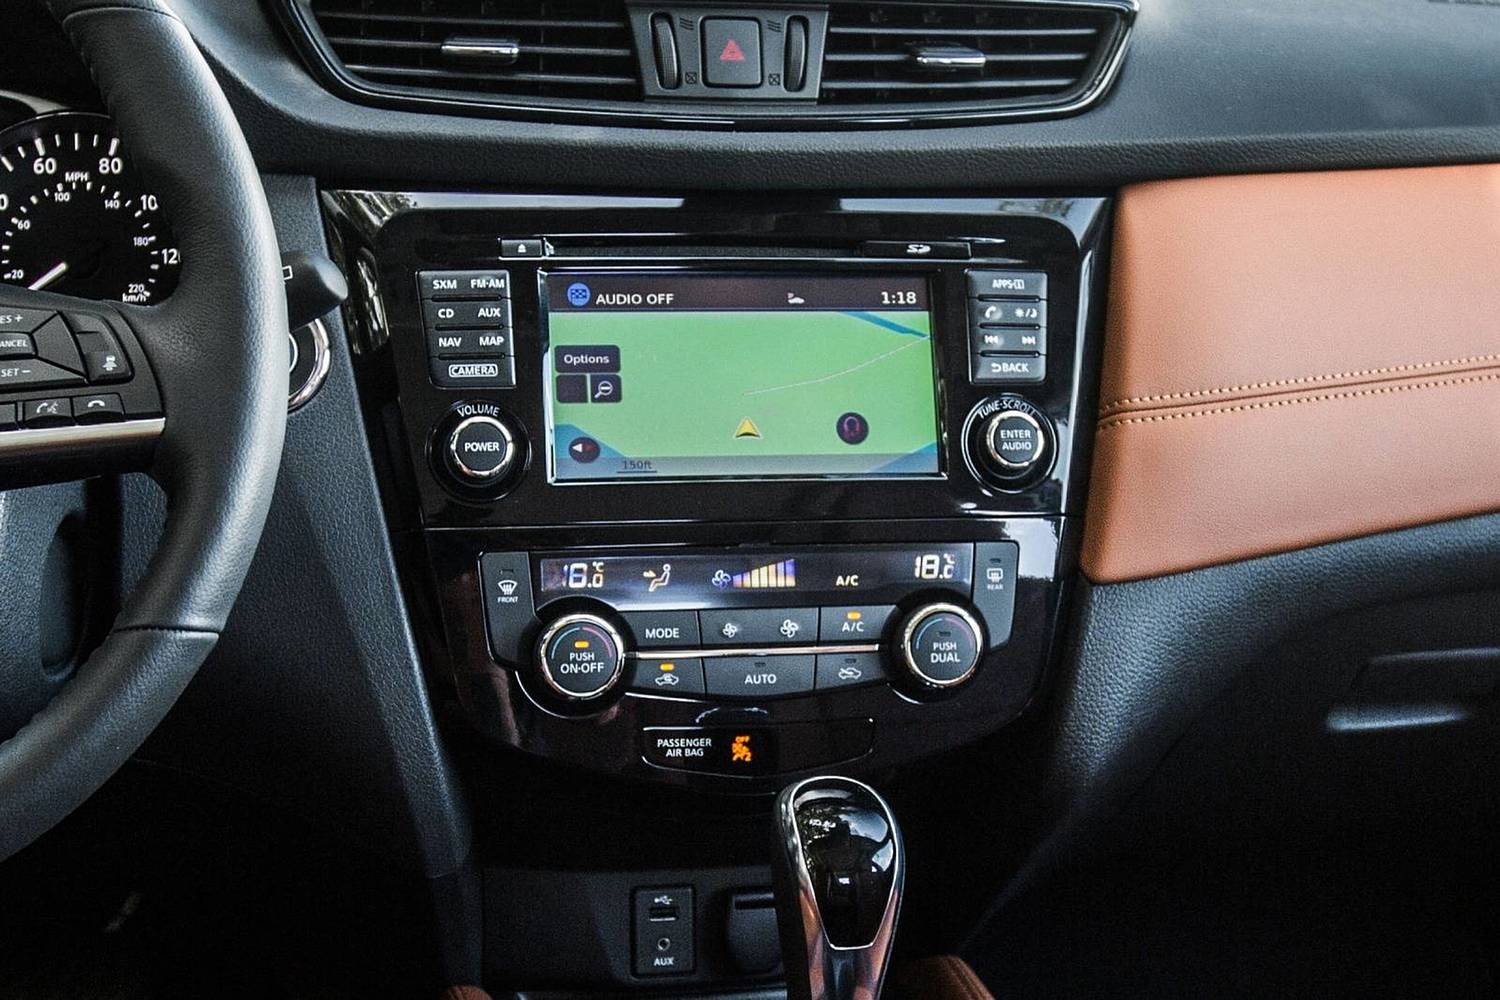 Nissan Rogue SL 4dr SUV Center Console. Platinum Reserve Package Shown. (2017 model year shown)